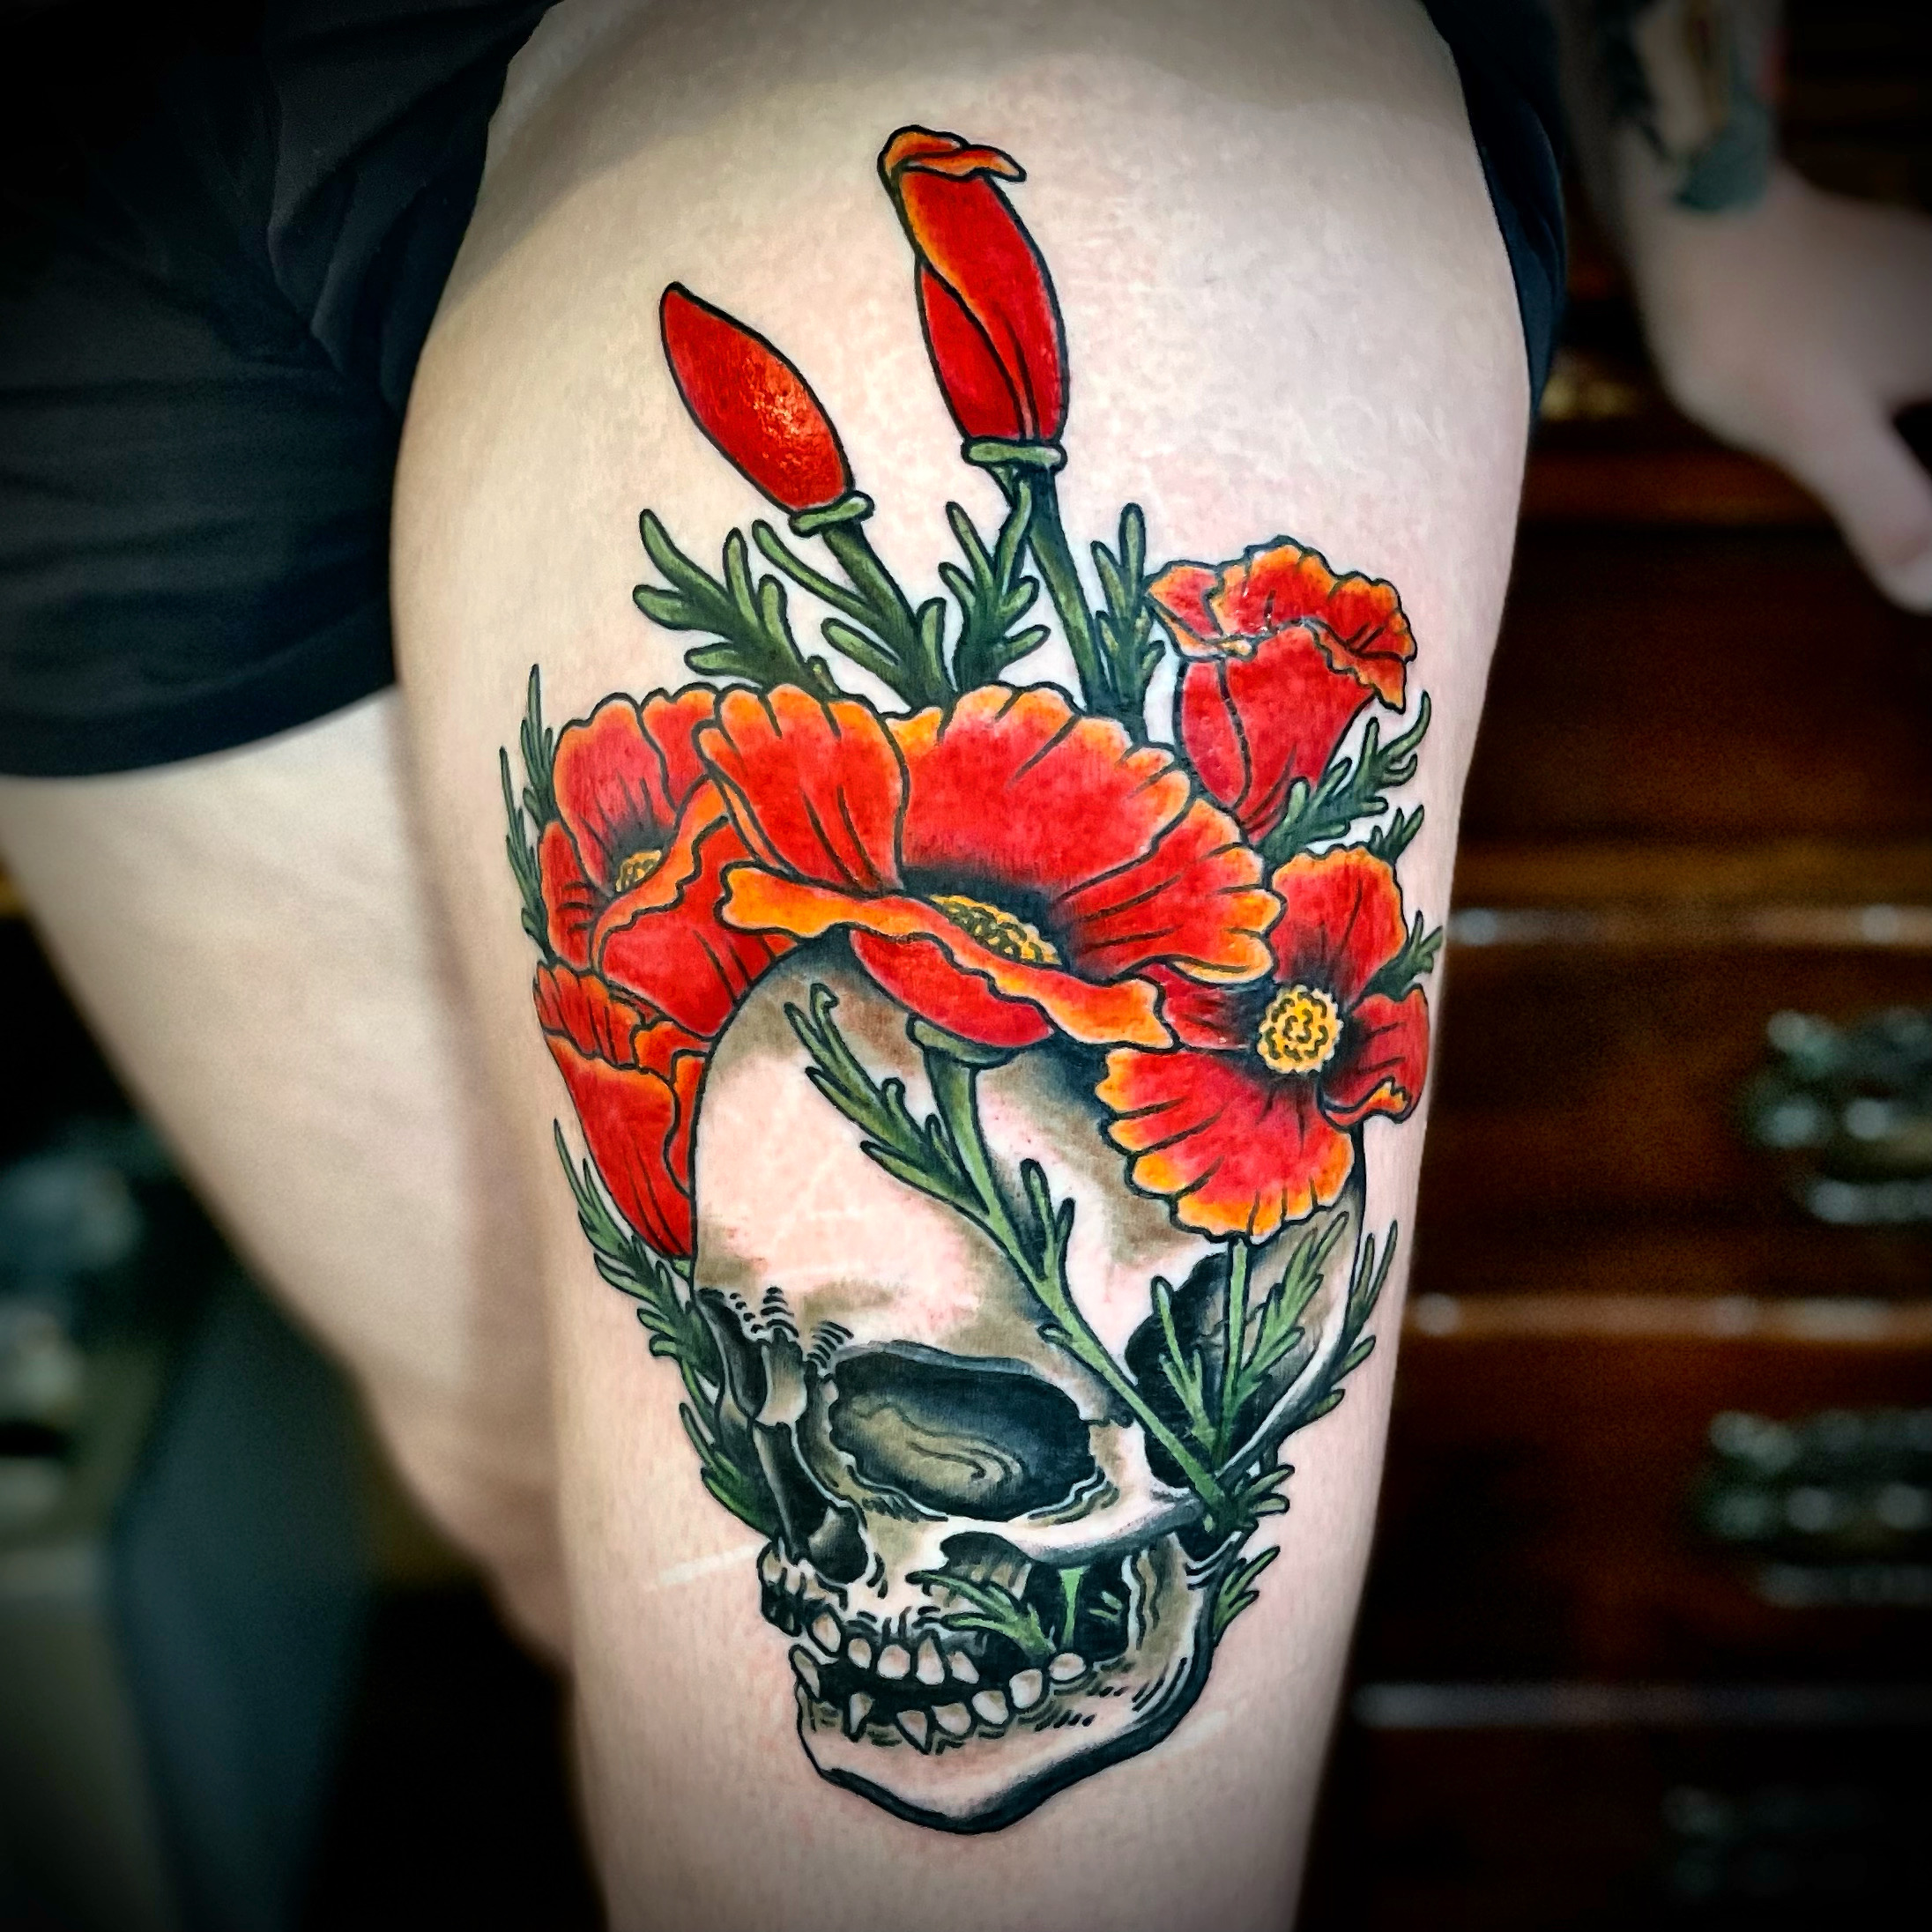 Tattoo of a skull and flowers